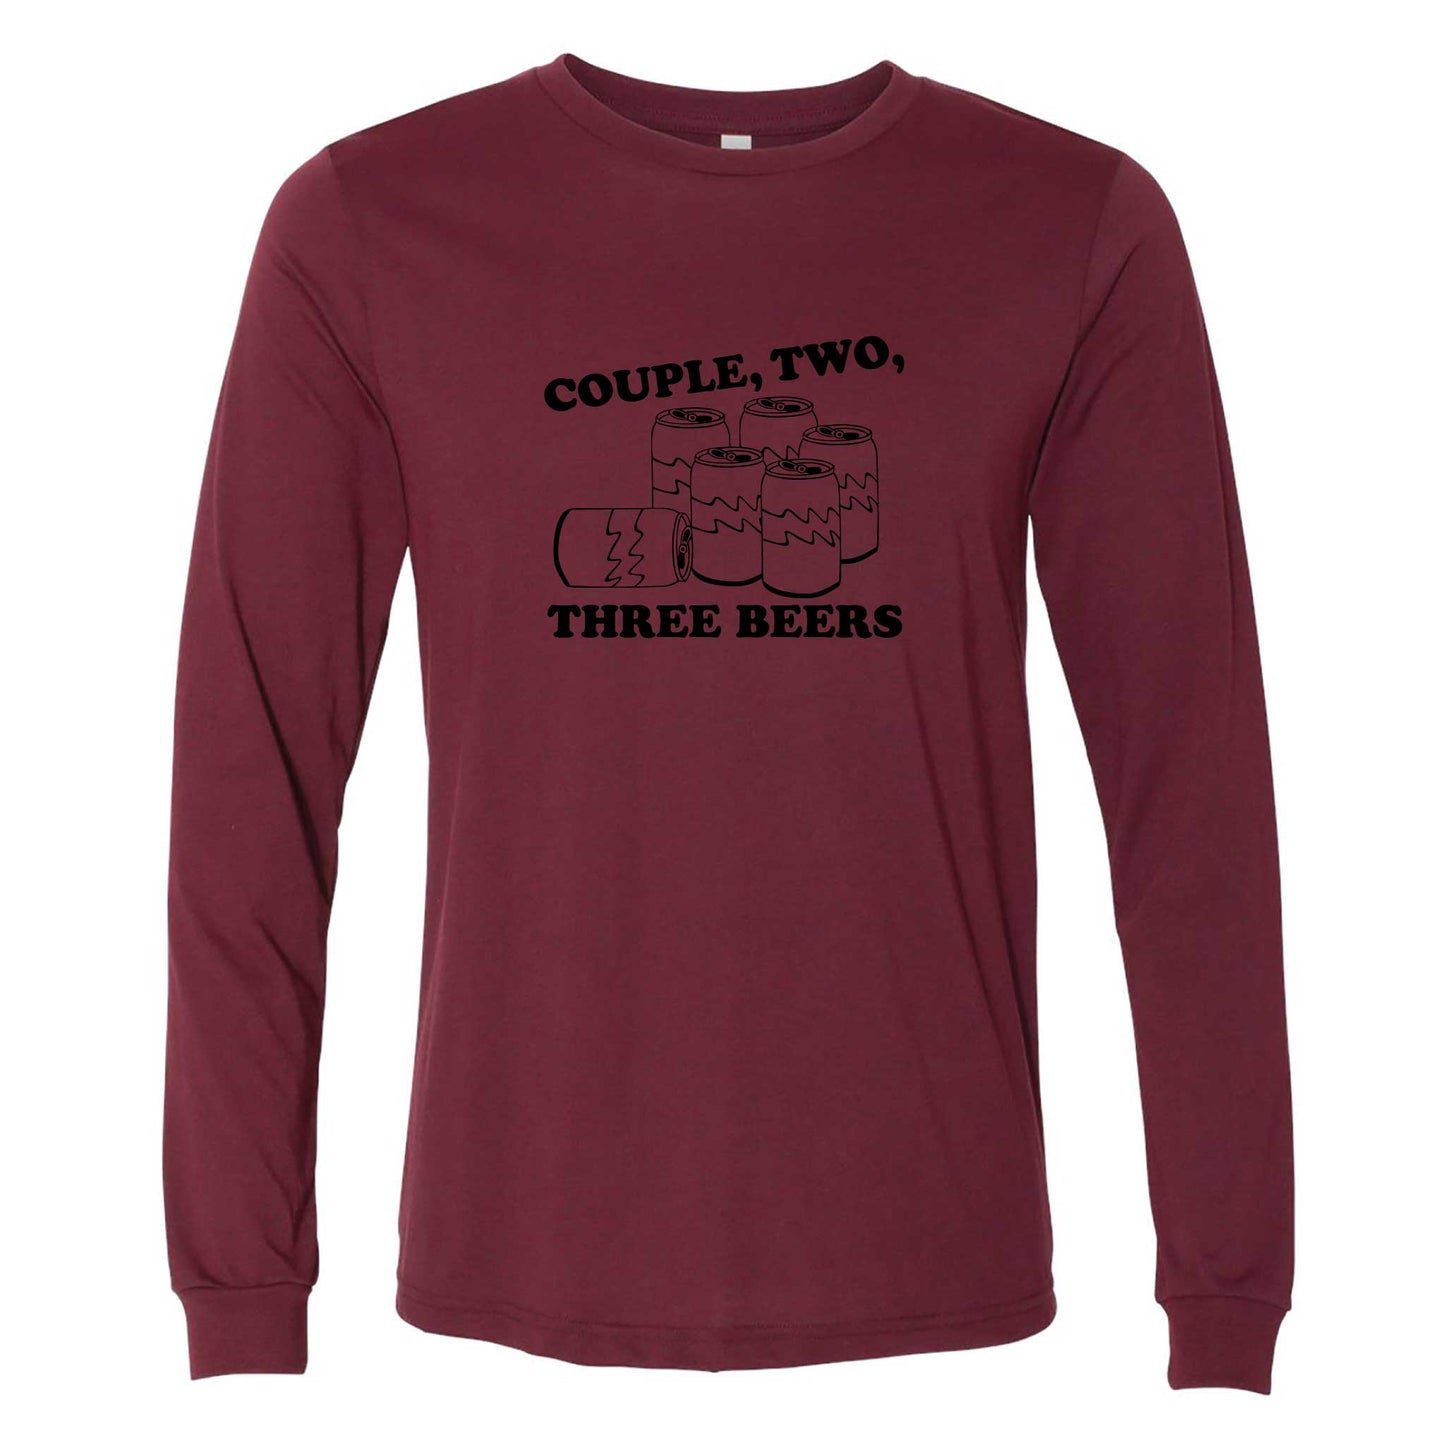 Couple, Two, Three Beers Long Sleeve T-Shirt